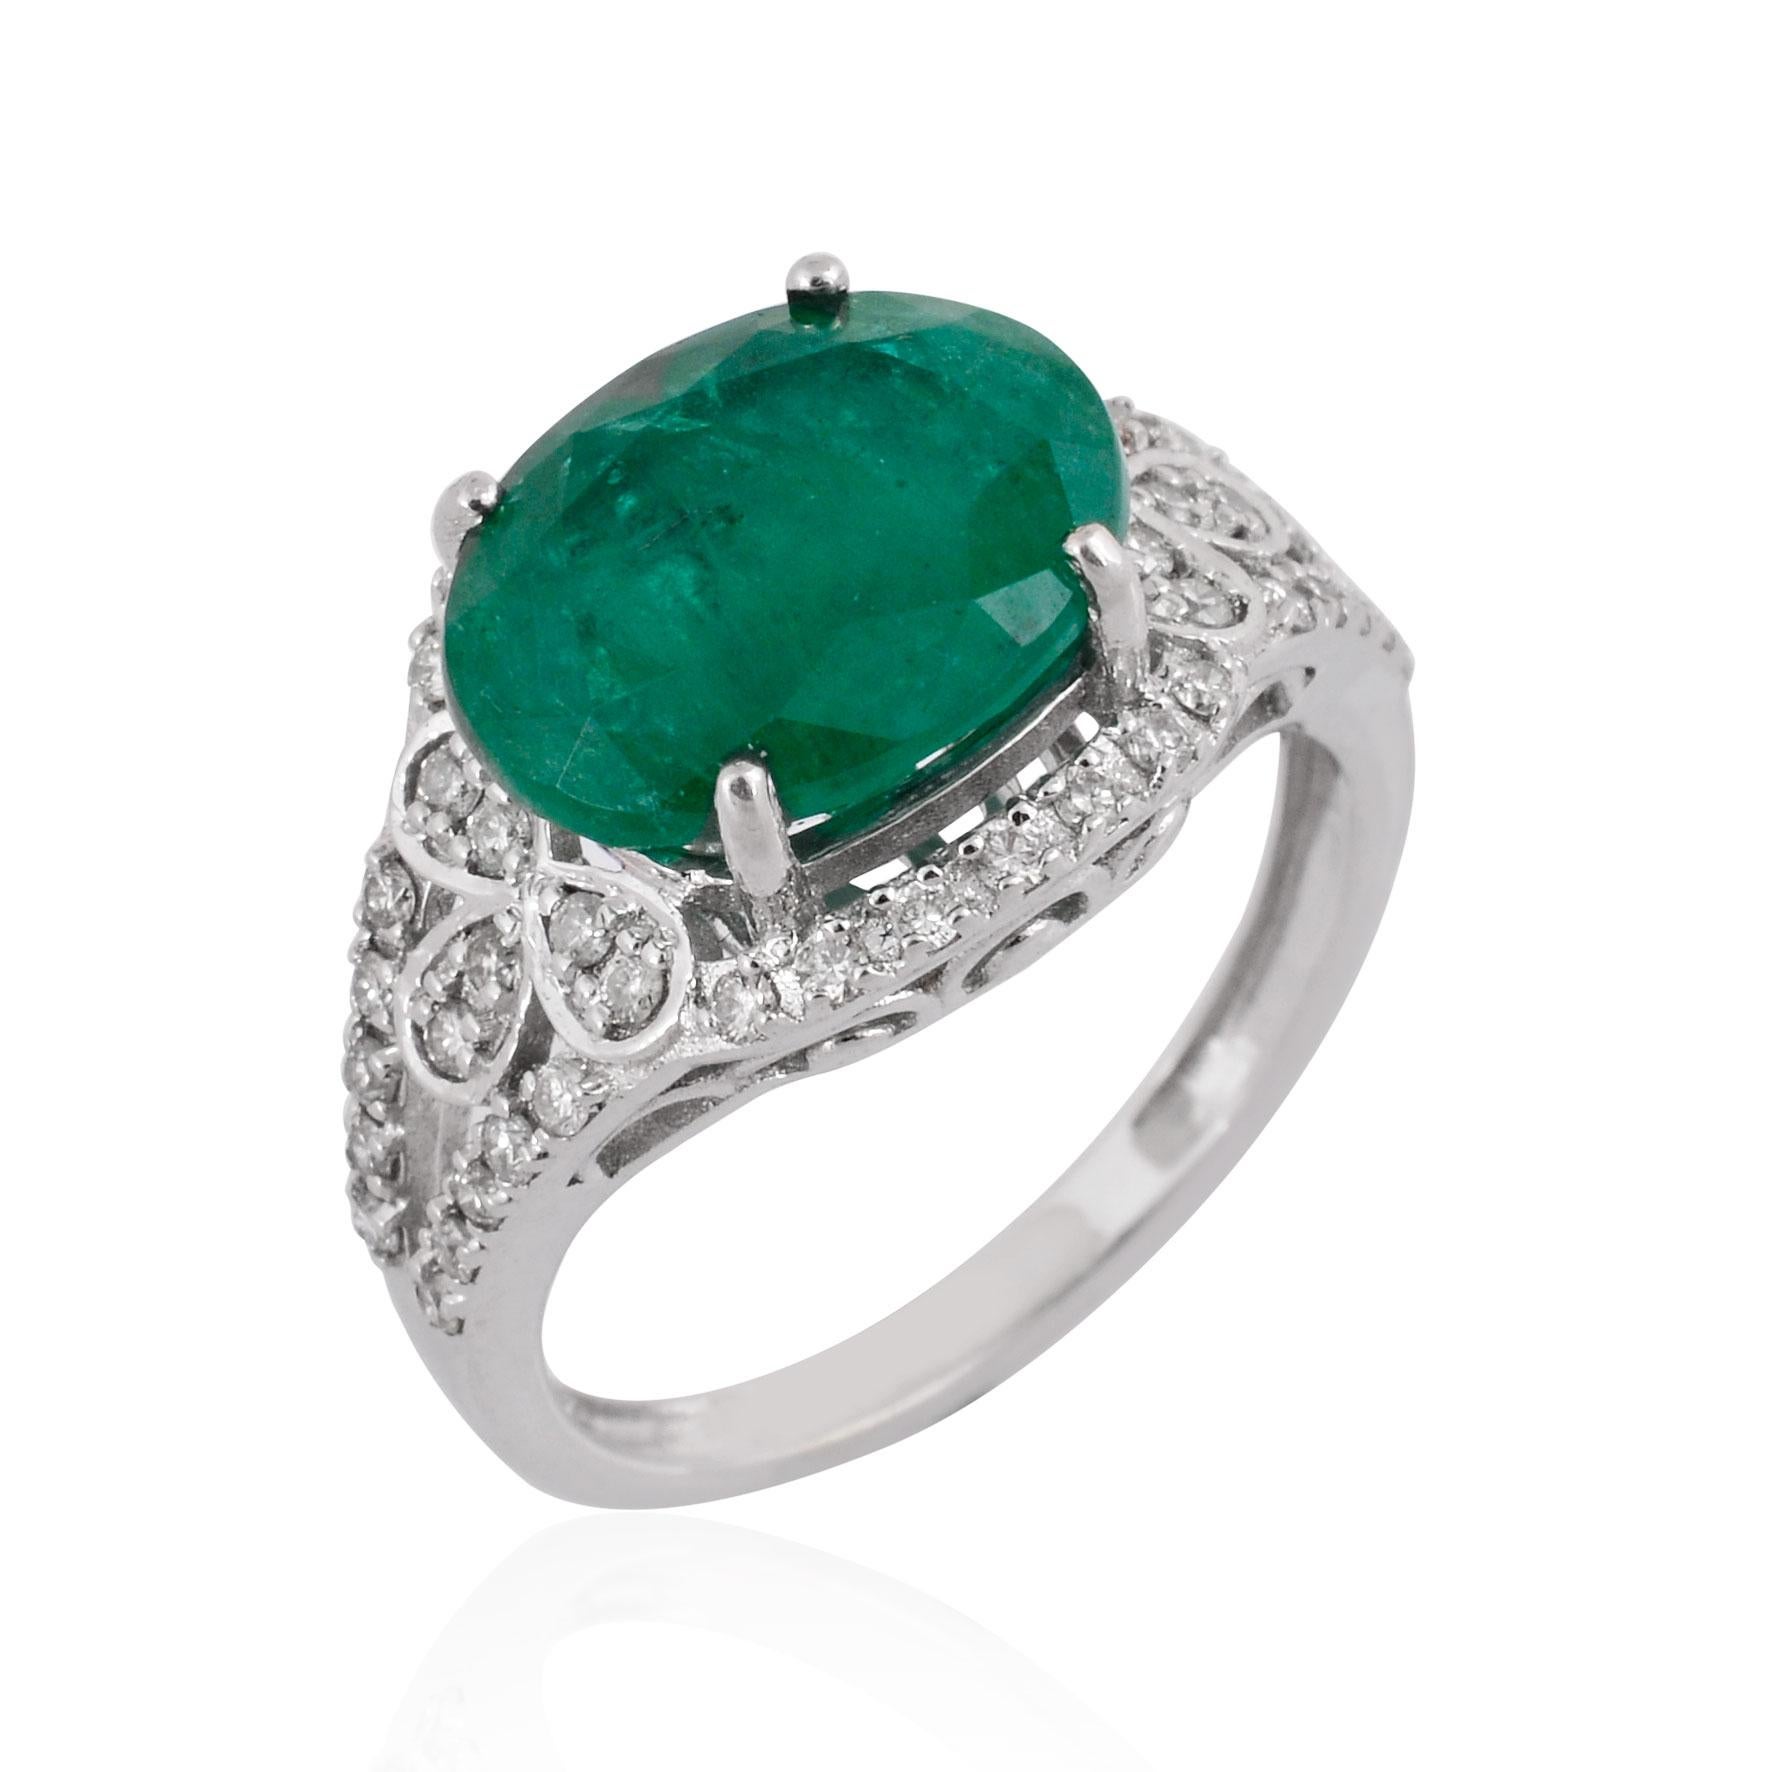 For Sale:  Oval Emerald Gemstone Dome Ring SI Clarity HI Color Diamond 18 Karat White Gold 2